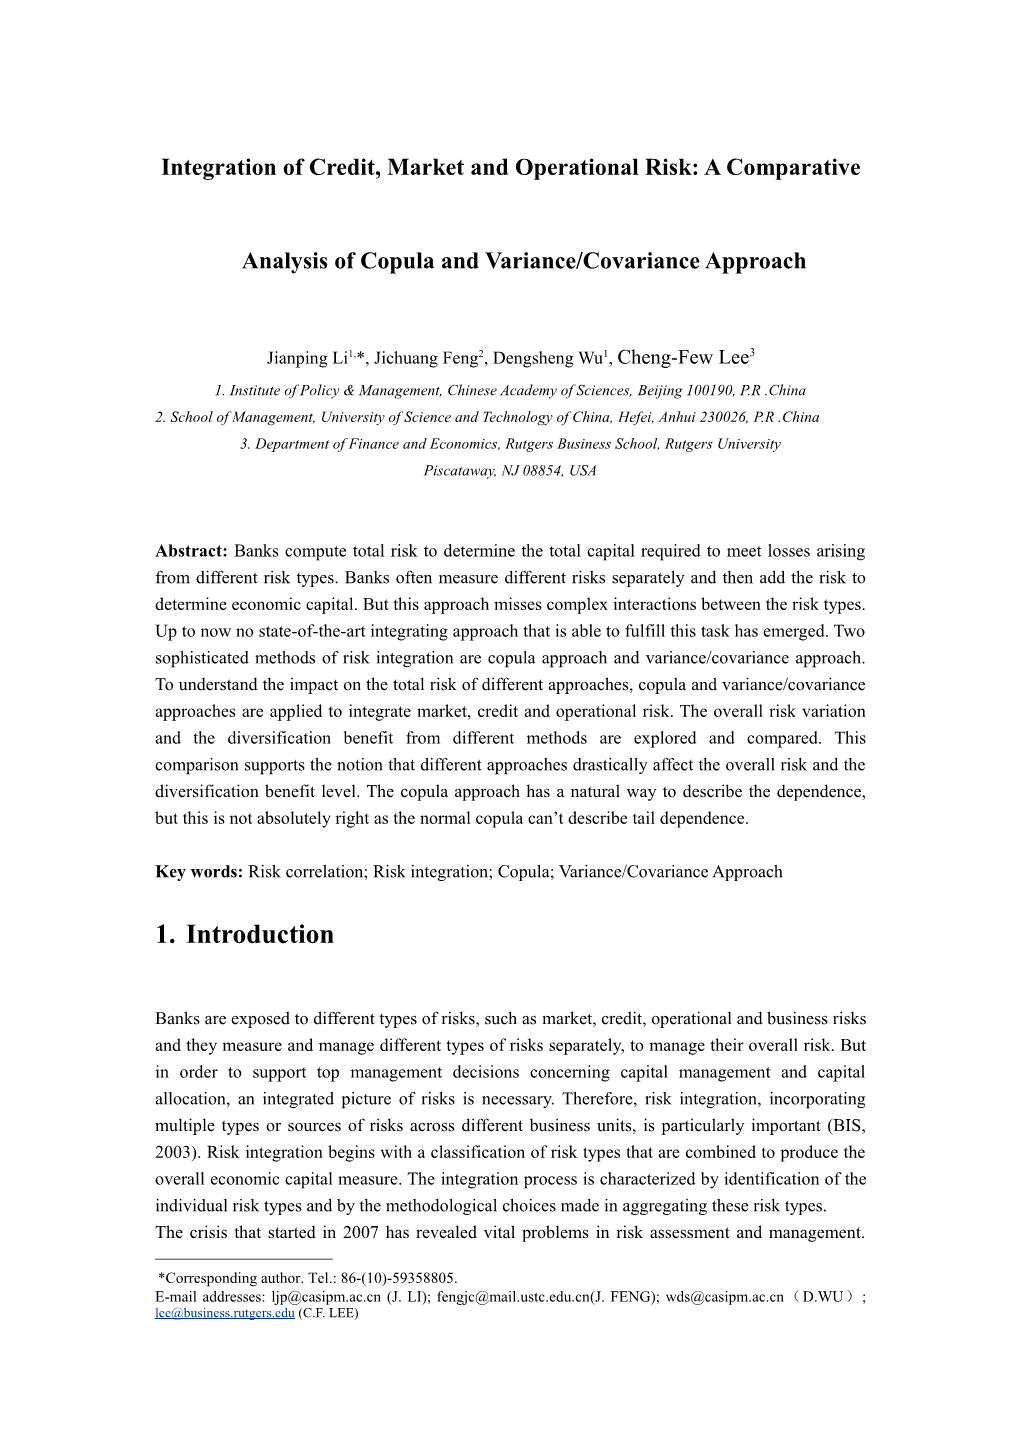 Integration Of Credit, Market And Operational Risk: A Comparative Analysis Of Copula And Variance/Covariance Approach